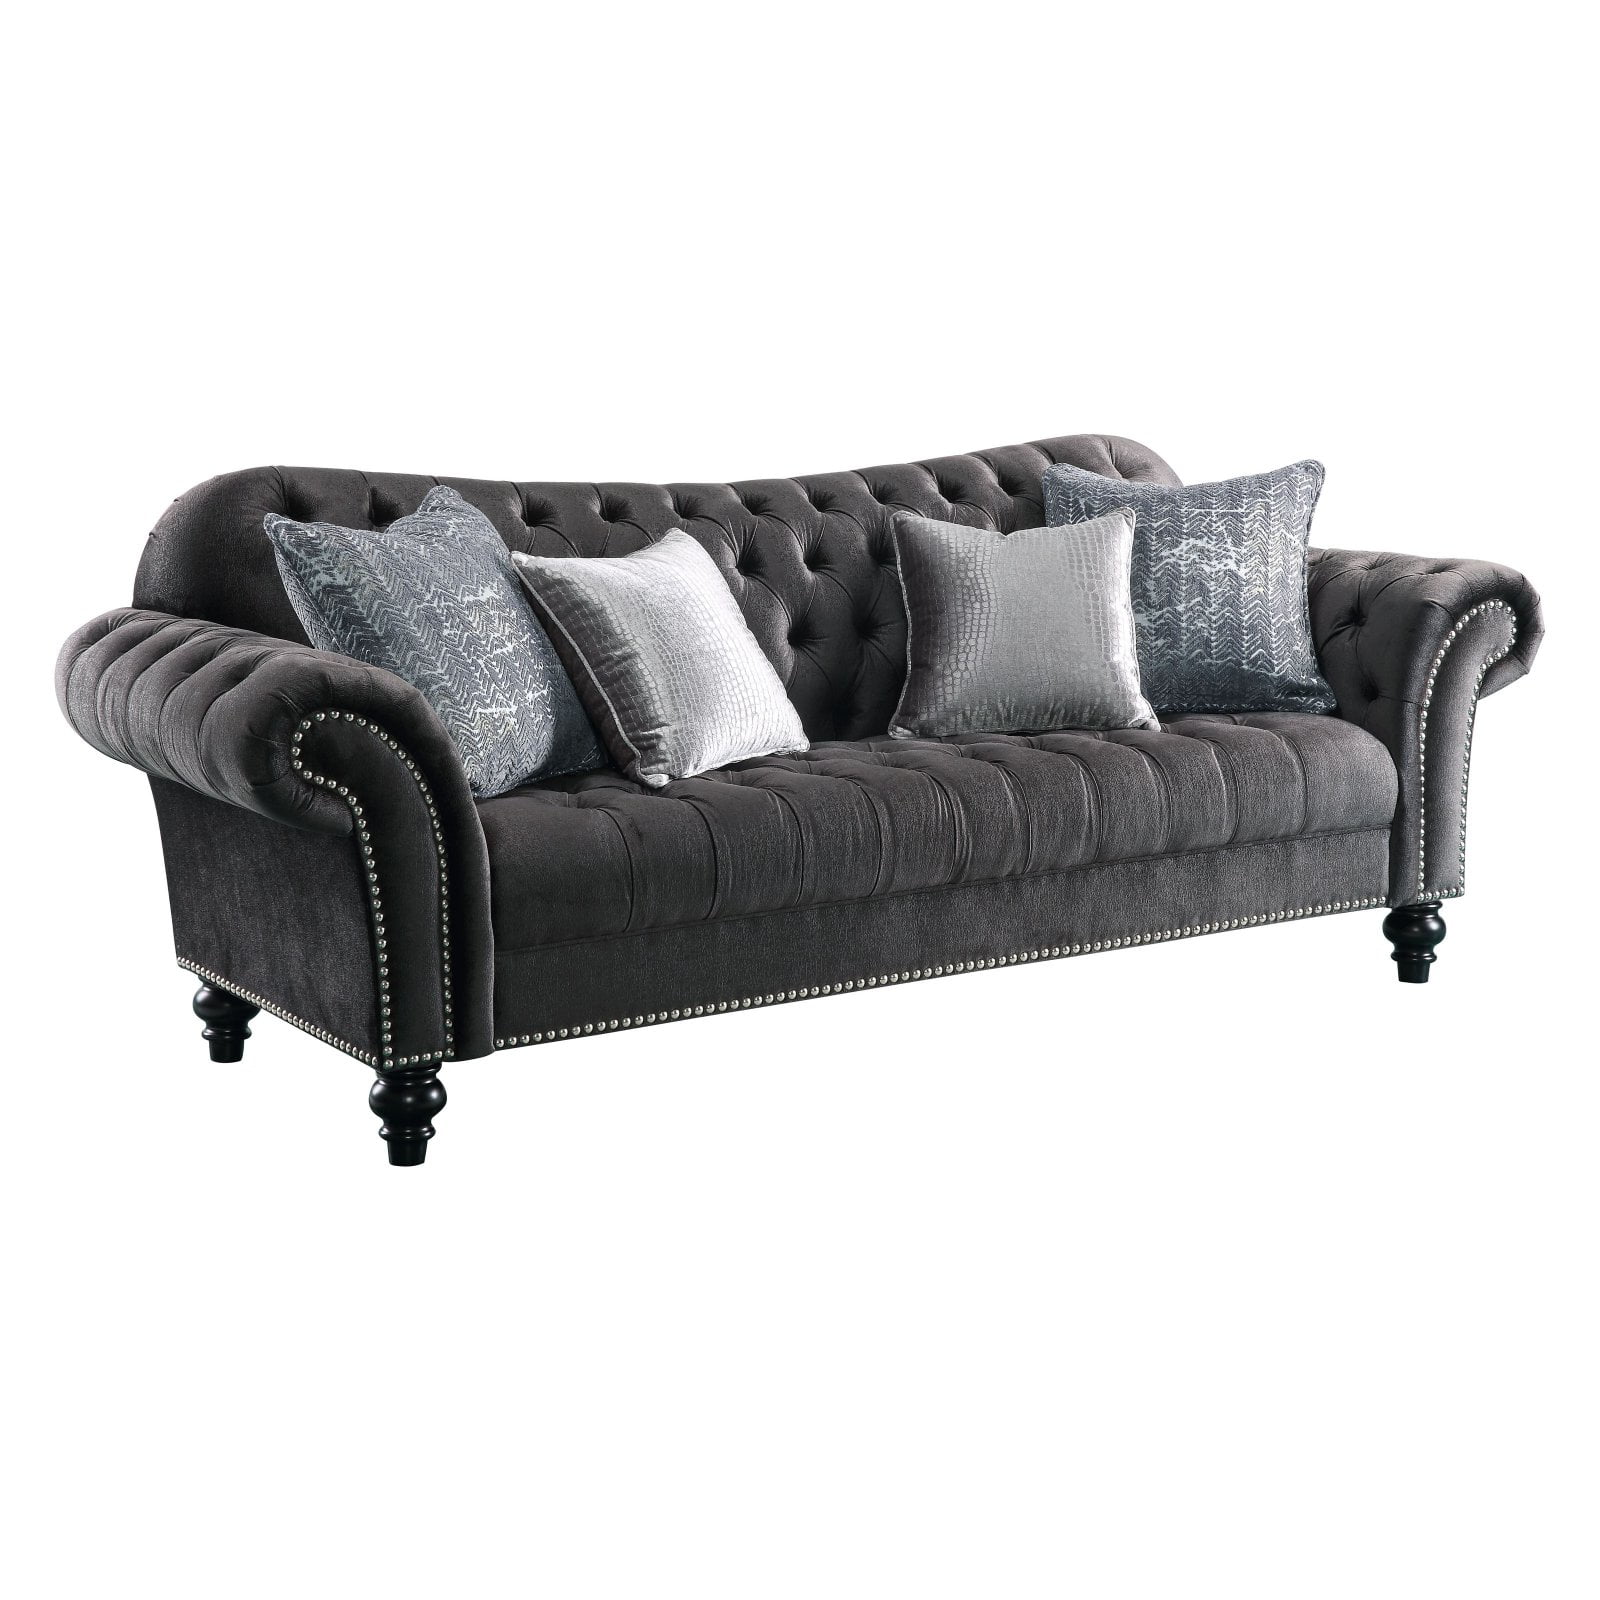 Picture of ACME 53090 Gaura Sofa with 4 Pillows - Dark Gray Velvet - 37 x 96 x 37 in.